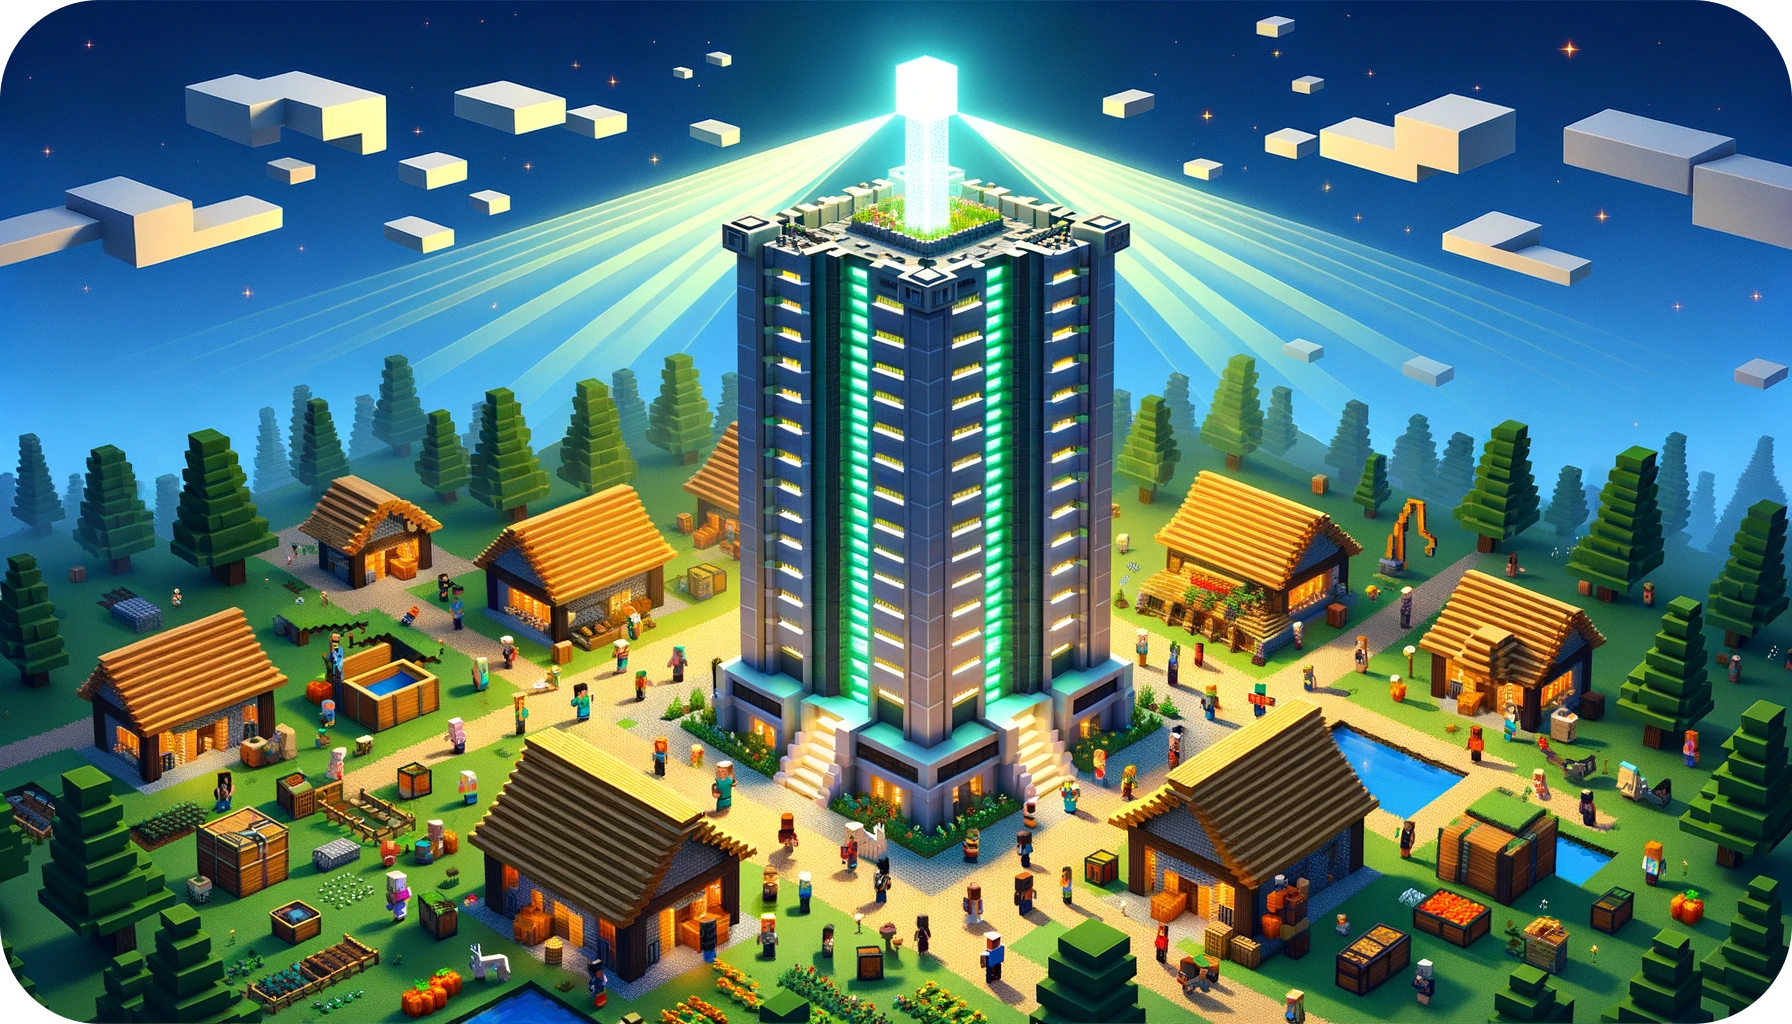 A lively village featuring a large server tower emitting a beacon beam, representing the 24/7 server uptime.